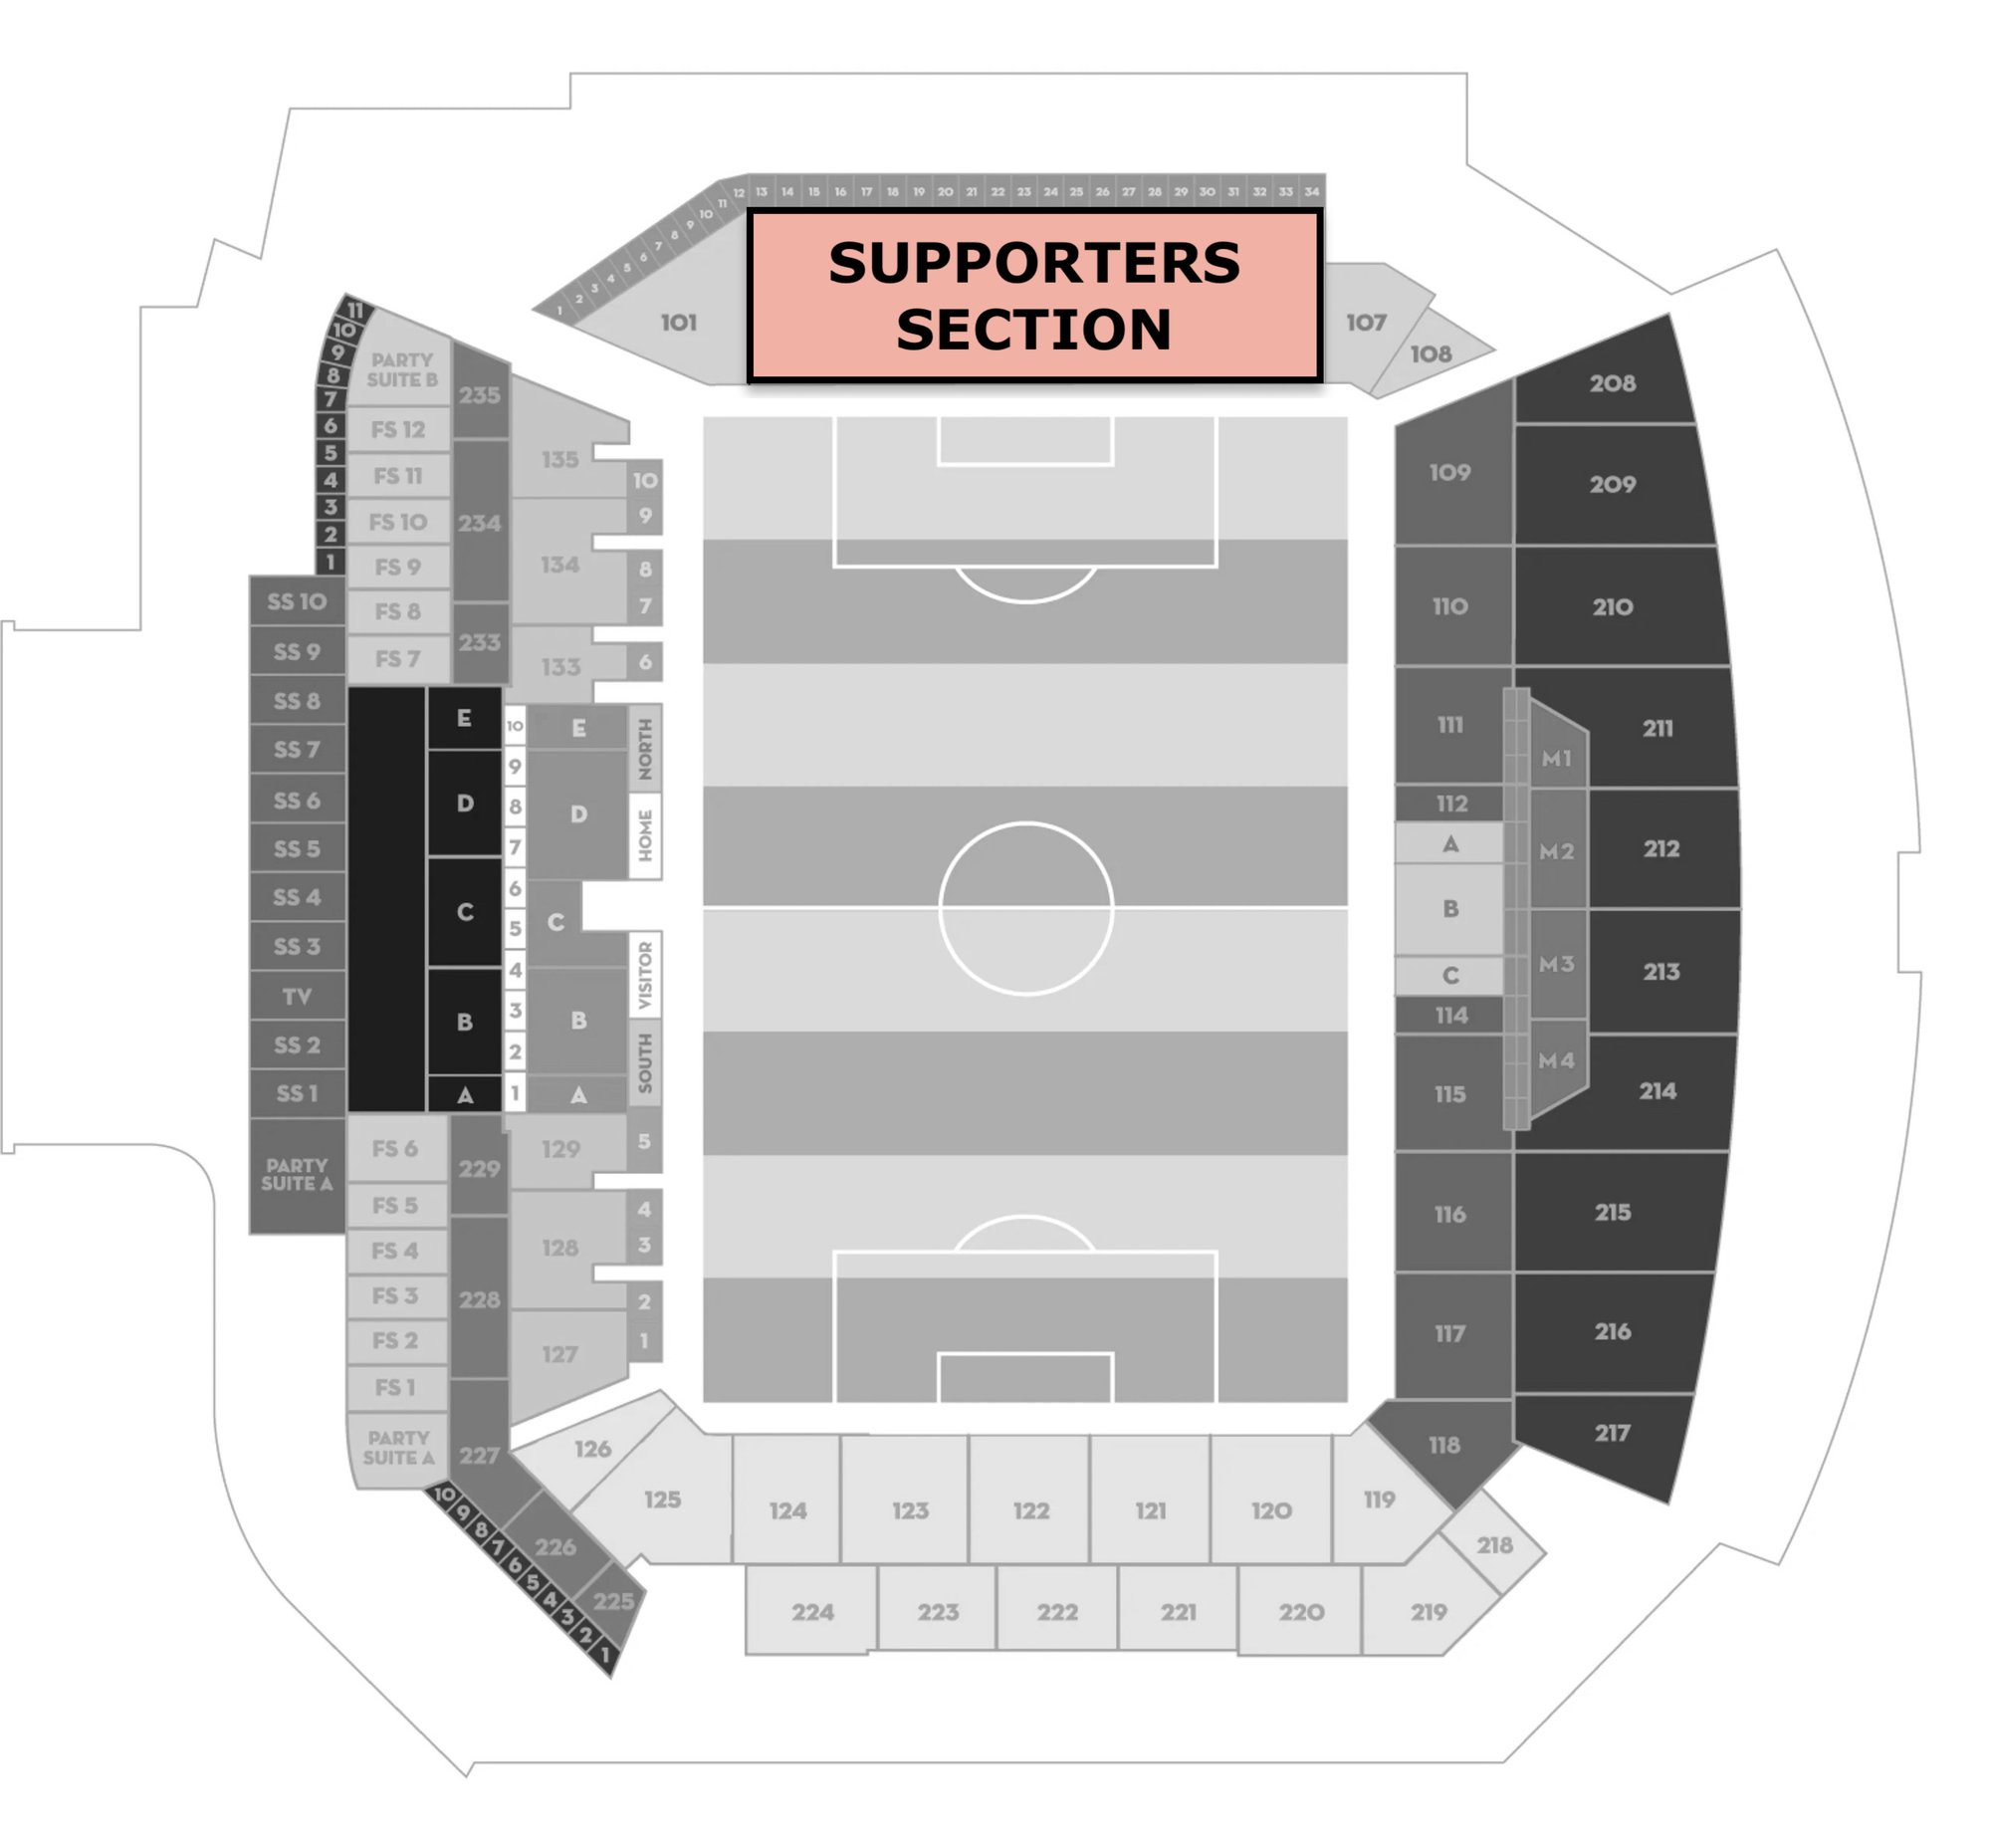 Supporters Section BMO Map